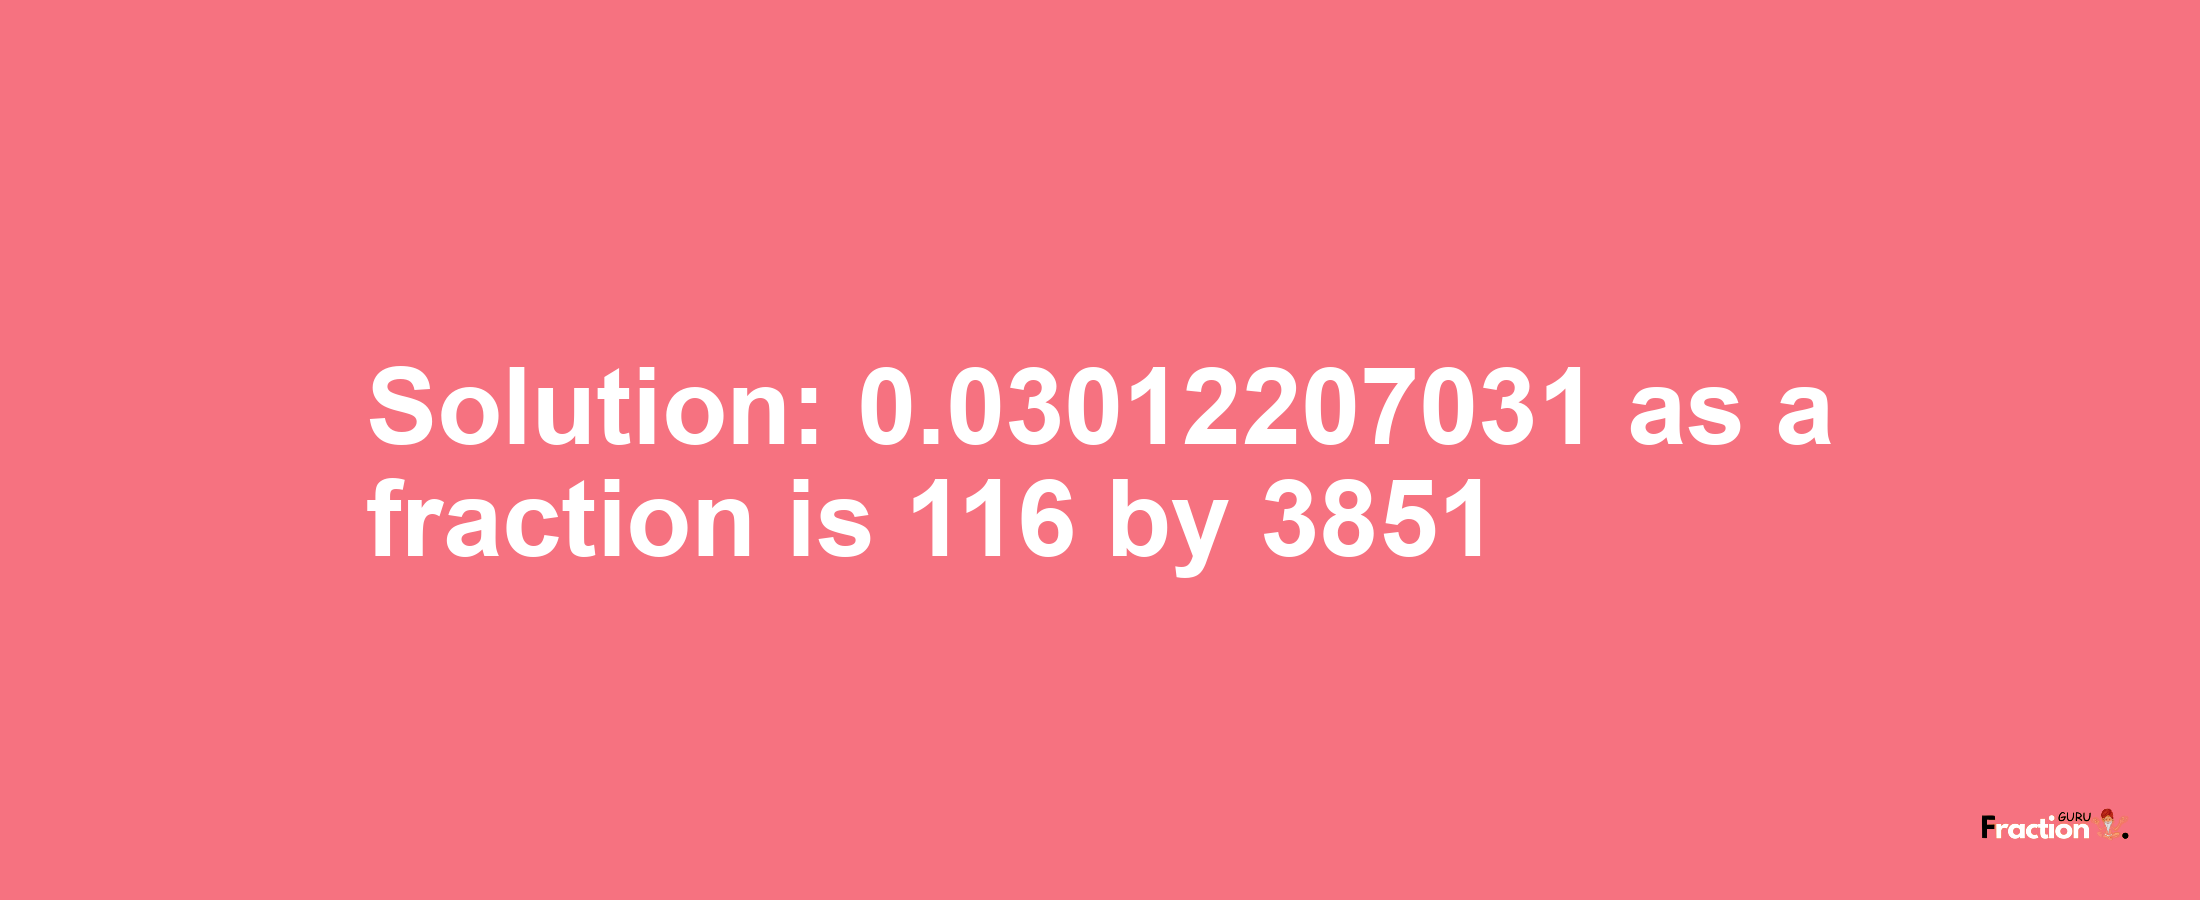 Solution:0.03012207031 as a fraction is 116/3851